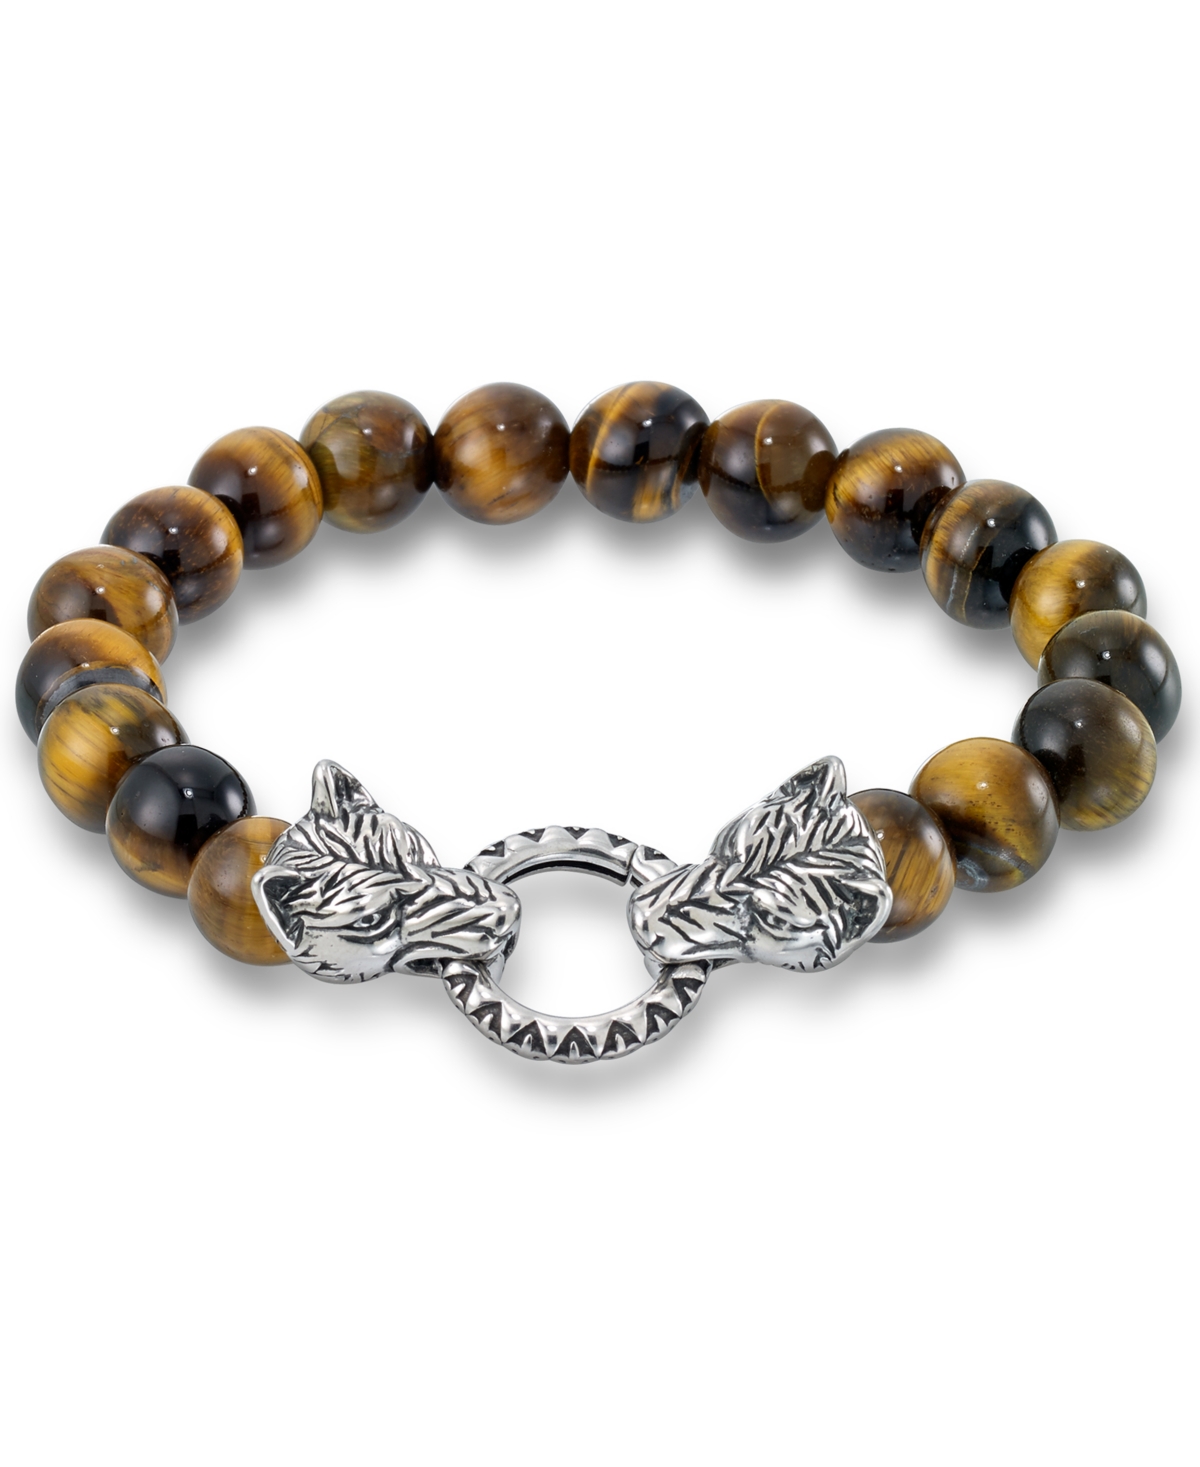 Men's Tiger's Eye Bead Wolf Head Stretch Bracelet in Stainless Steel (Also in Onyx & White Agate) - White Agate